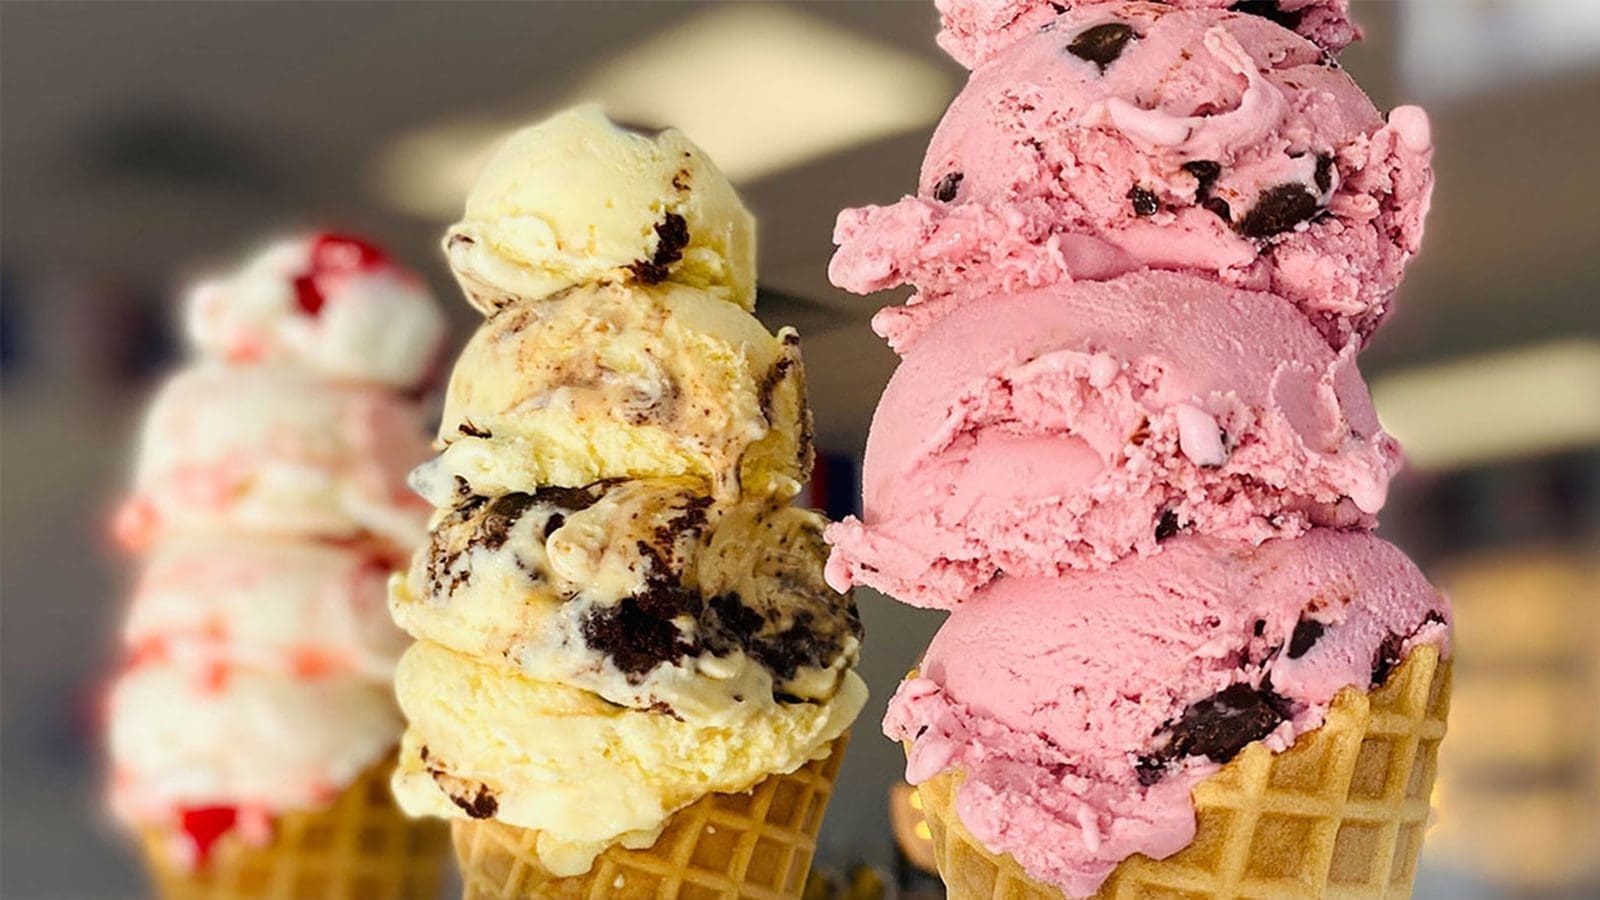 Big Olaf ice cream linked to deadly Listeria outbreak